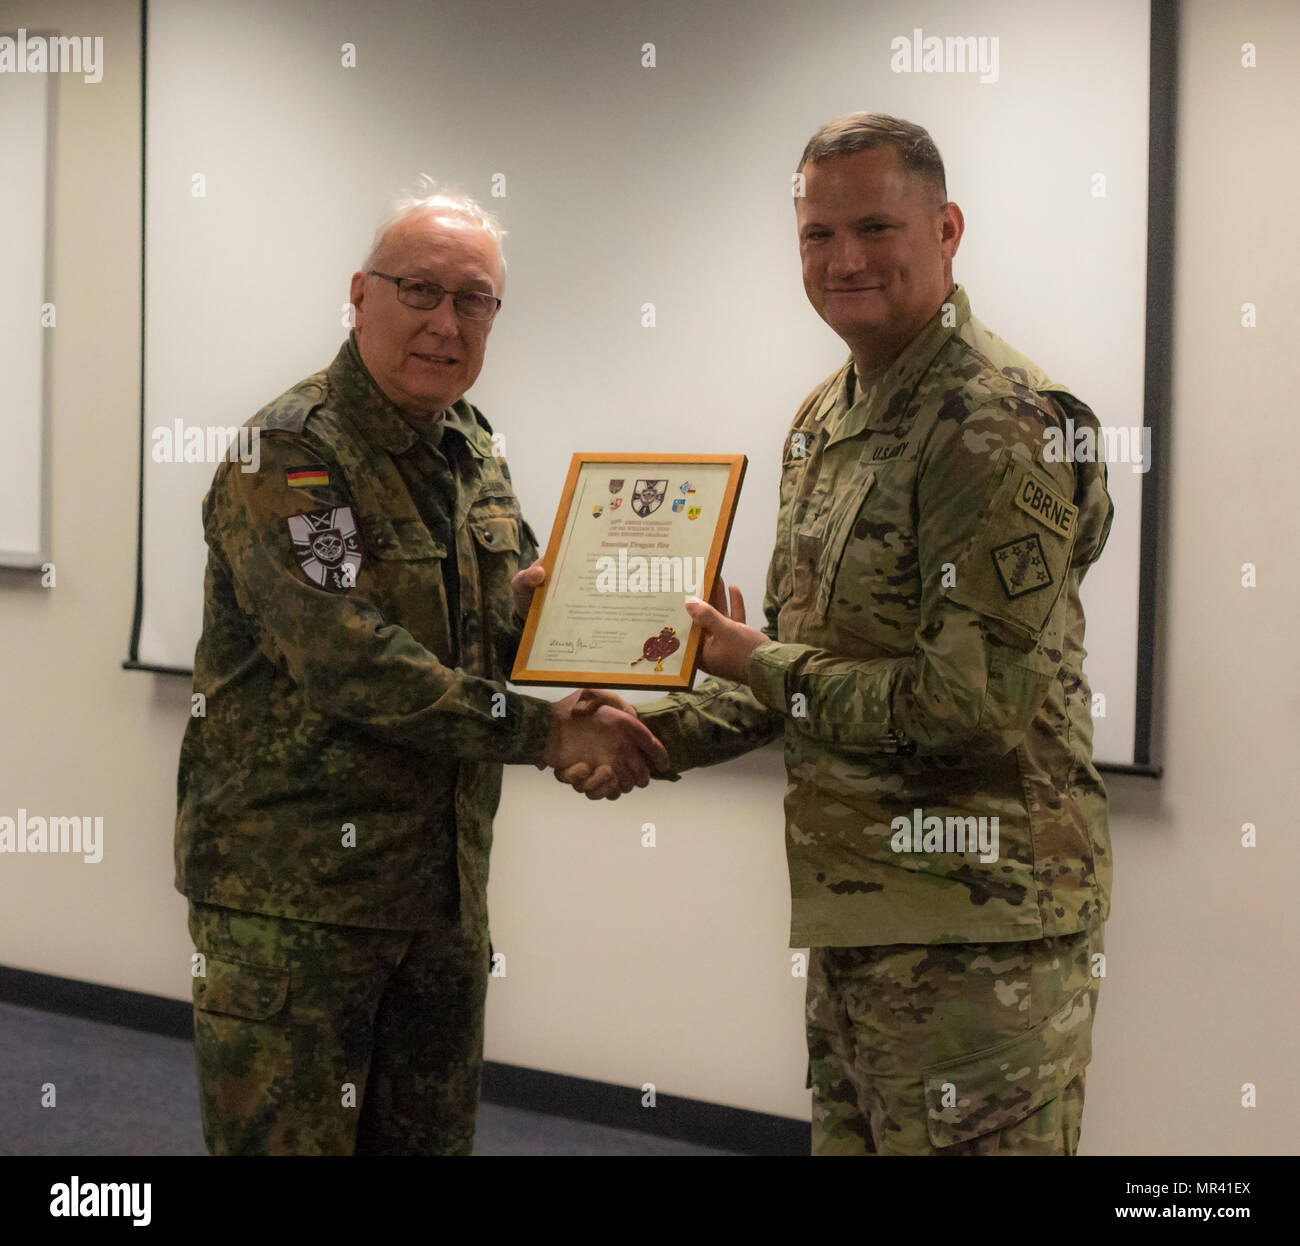 U.S. Army Brig. Gen. William E. King IV, Commander of the 20th CBRNE Command, receives an award from Col. Henry Neumann, Bundeswehr CBRN Commander, Satsop , Wash., May 2, 2017. Dragon fire is a bilateral exercise between the 48th Chemical, Biological, Radiological, and Nuclear (CBRN) Brigade and the German Bundswehr CBRN Defense command. It also serves as the culmination training event and validation exercise for the 22nd CBRN Battalion. (U.S. Army Pfc. Dra'corius White) Stock Photo